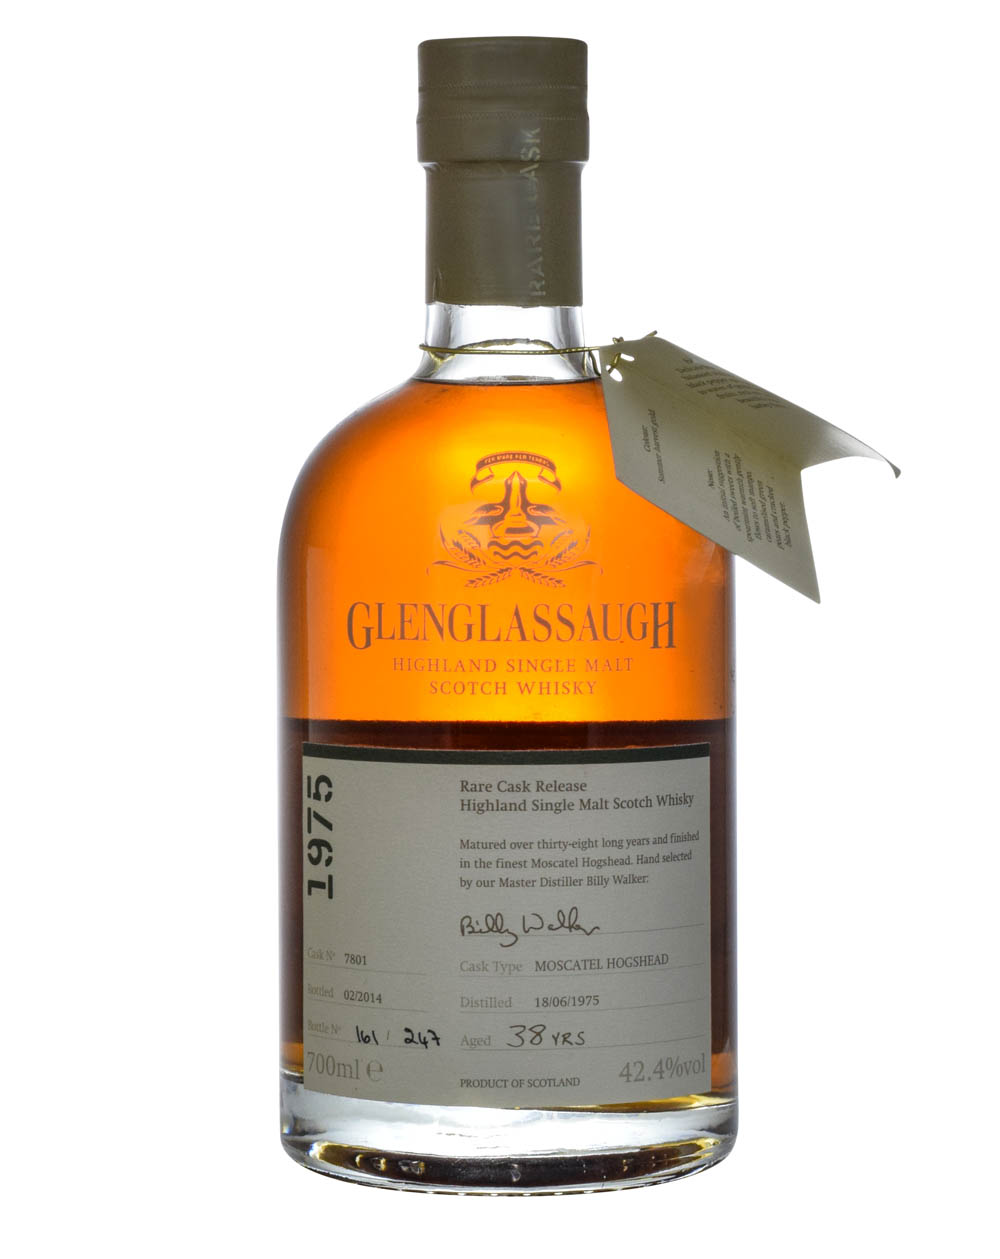 Glenglassaugh 38 Years Old 1975 Moscatel Hogshead Musthave Malts MHM